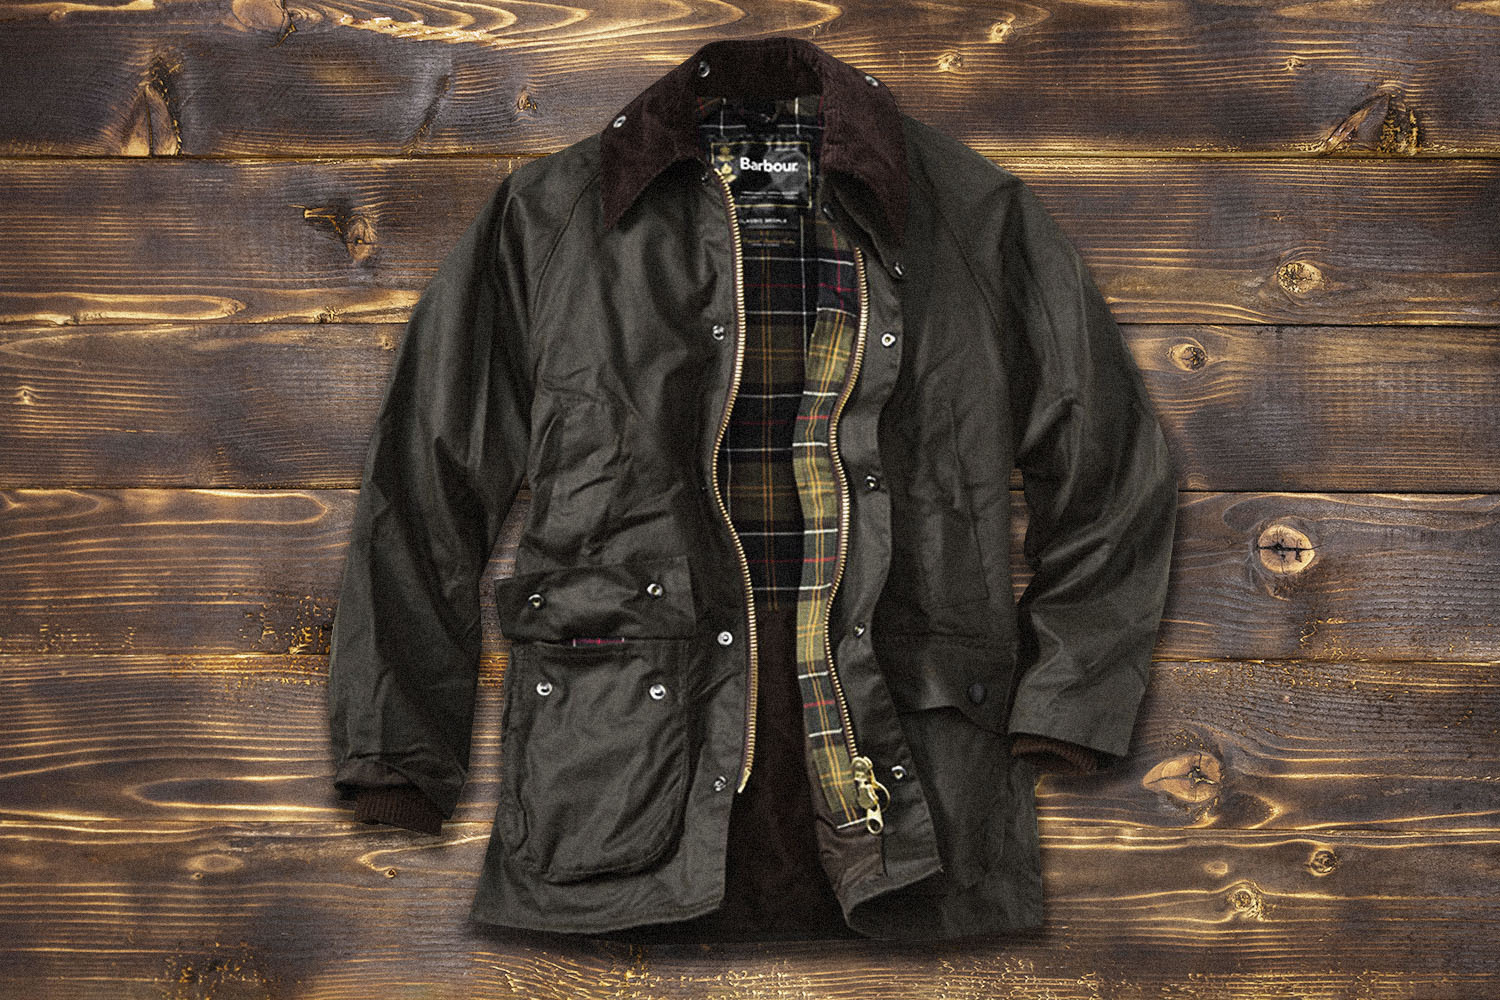 send barbour for re wax